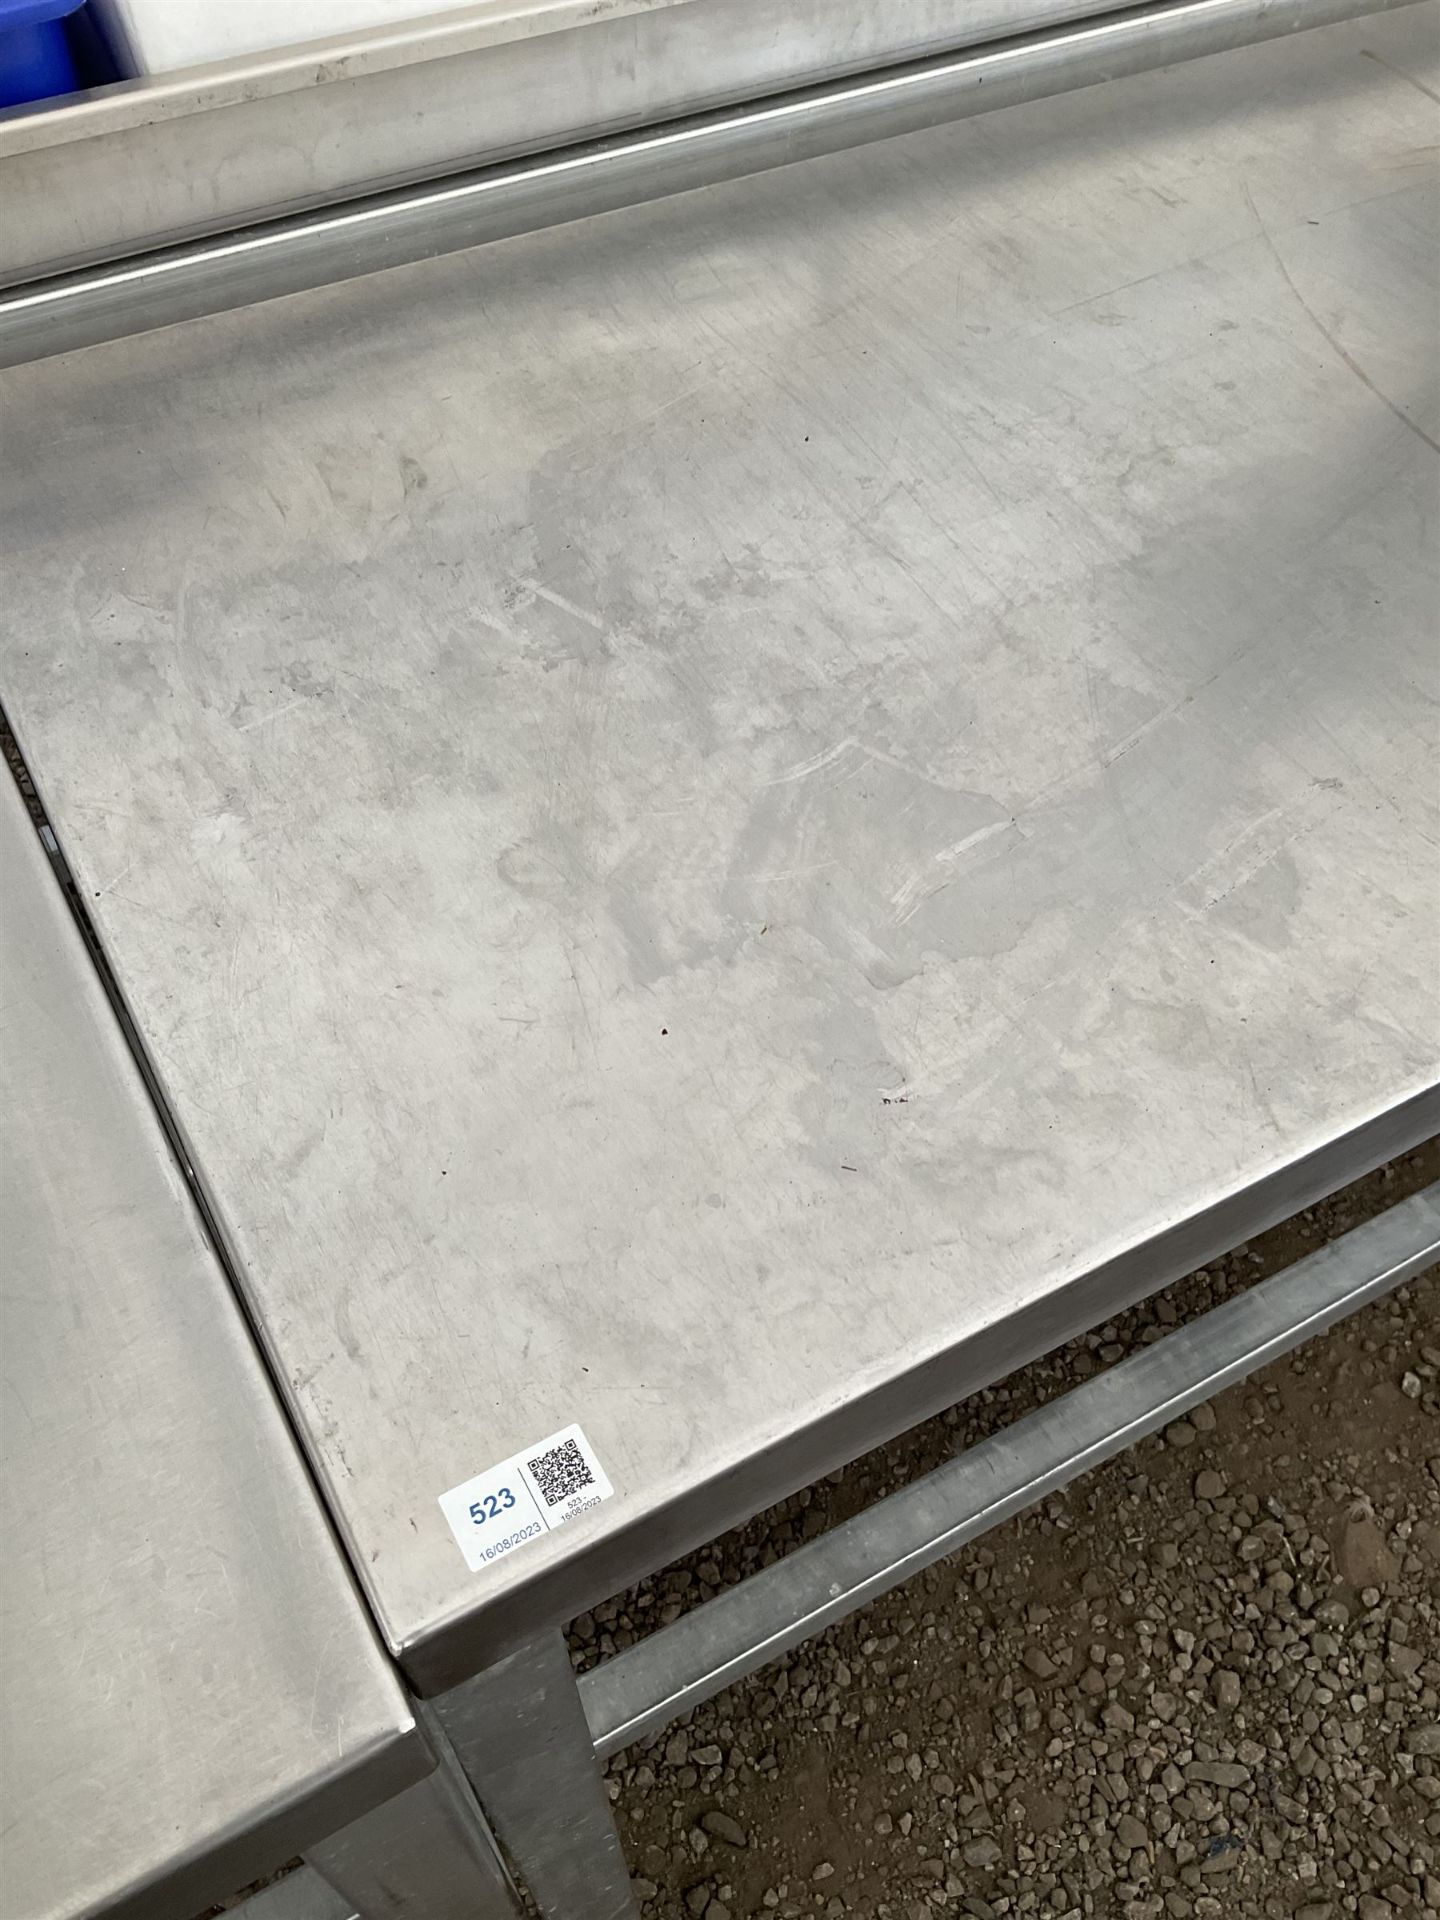 Aluminium framed preparation table with stainless steel top - Image 3 of 3